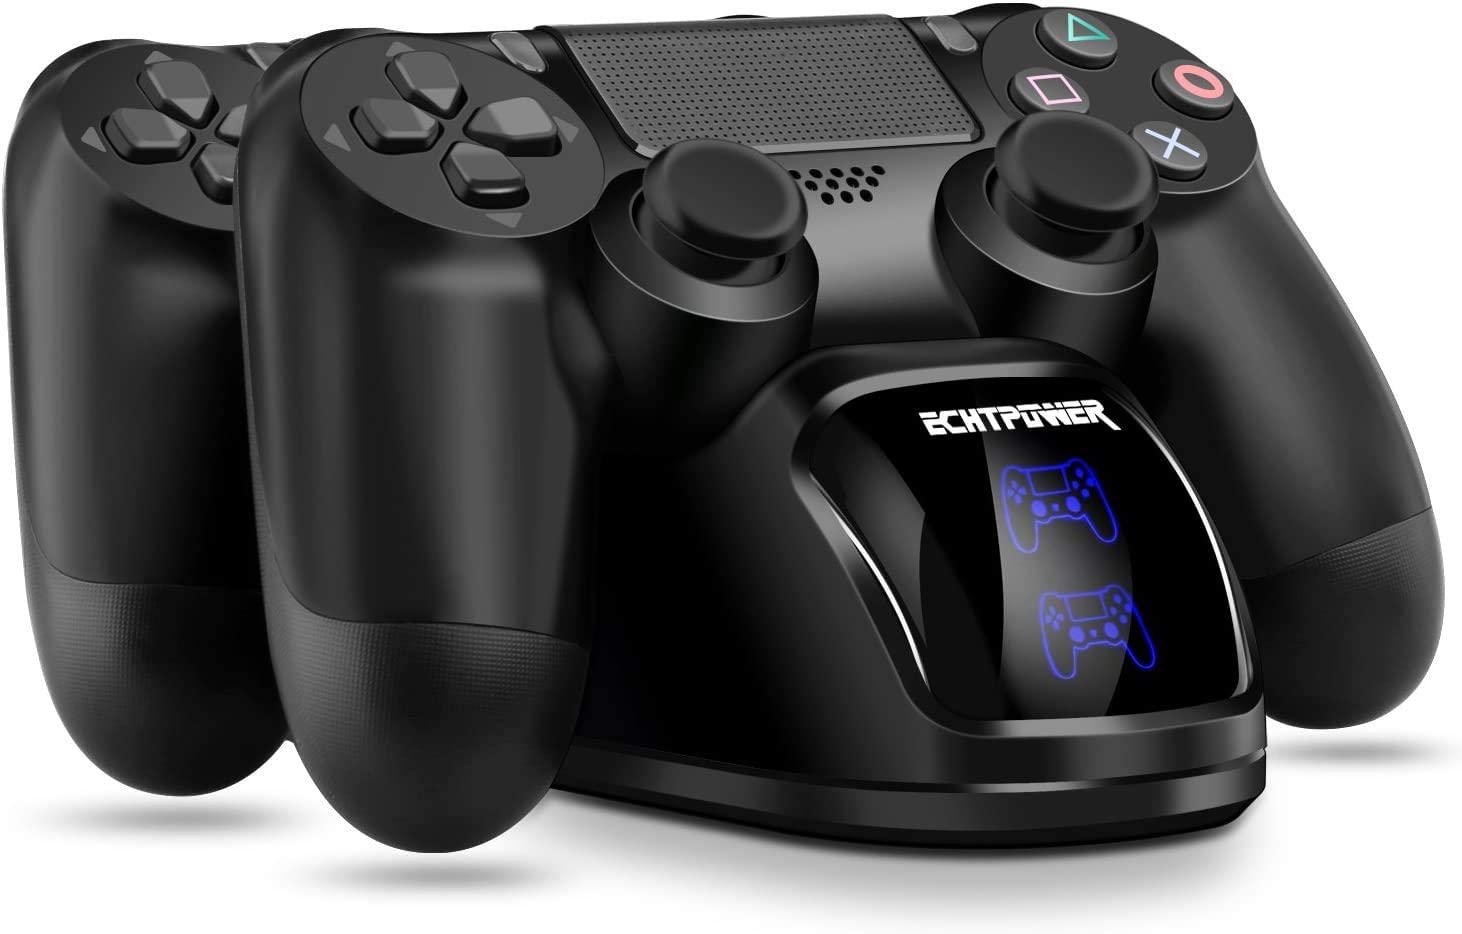 Ricarica Controller PS4,ECHTPower PS4 Docking Station e Indicatore